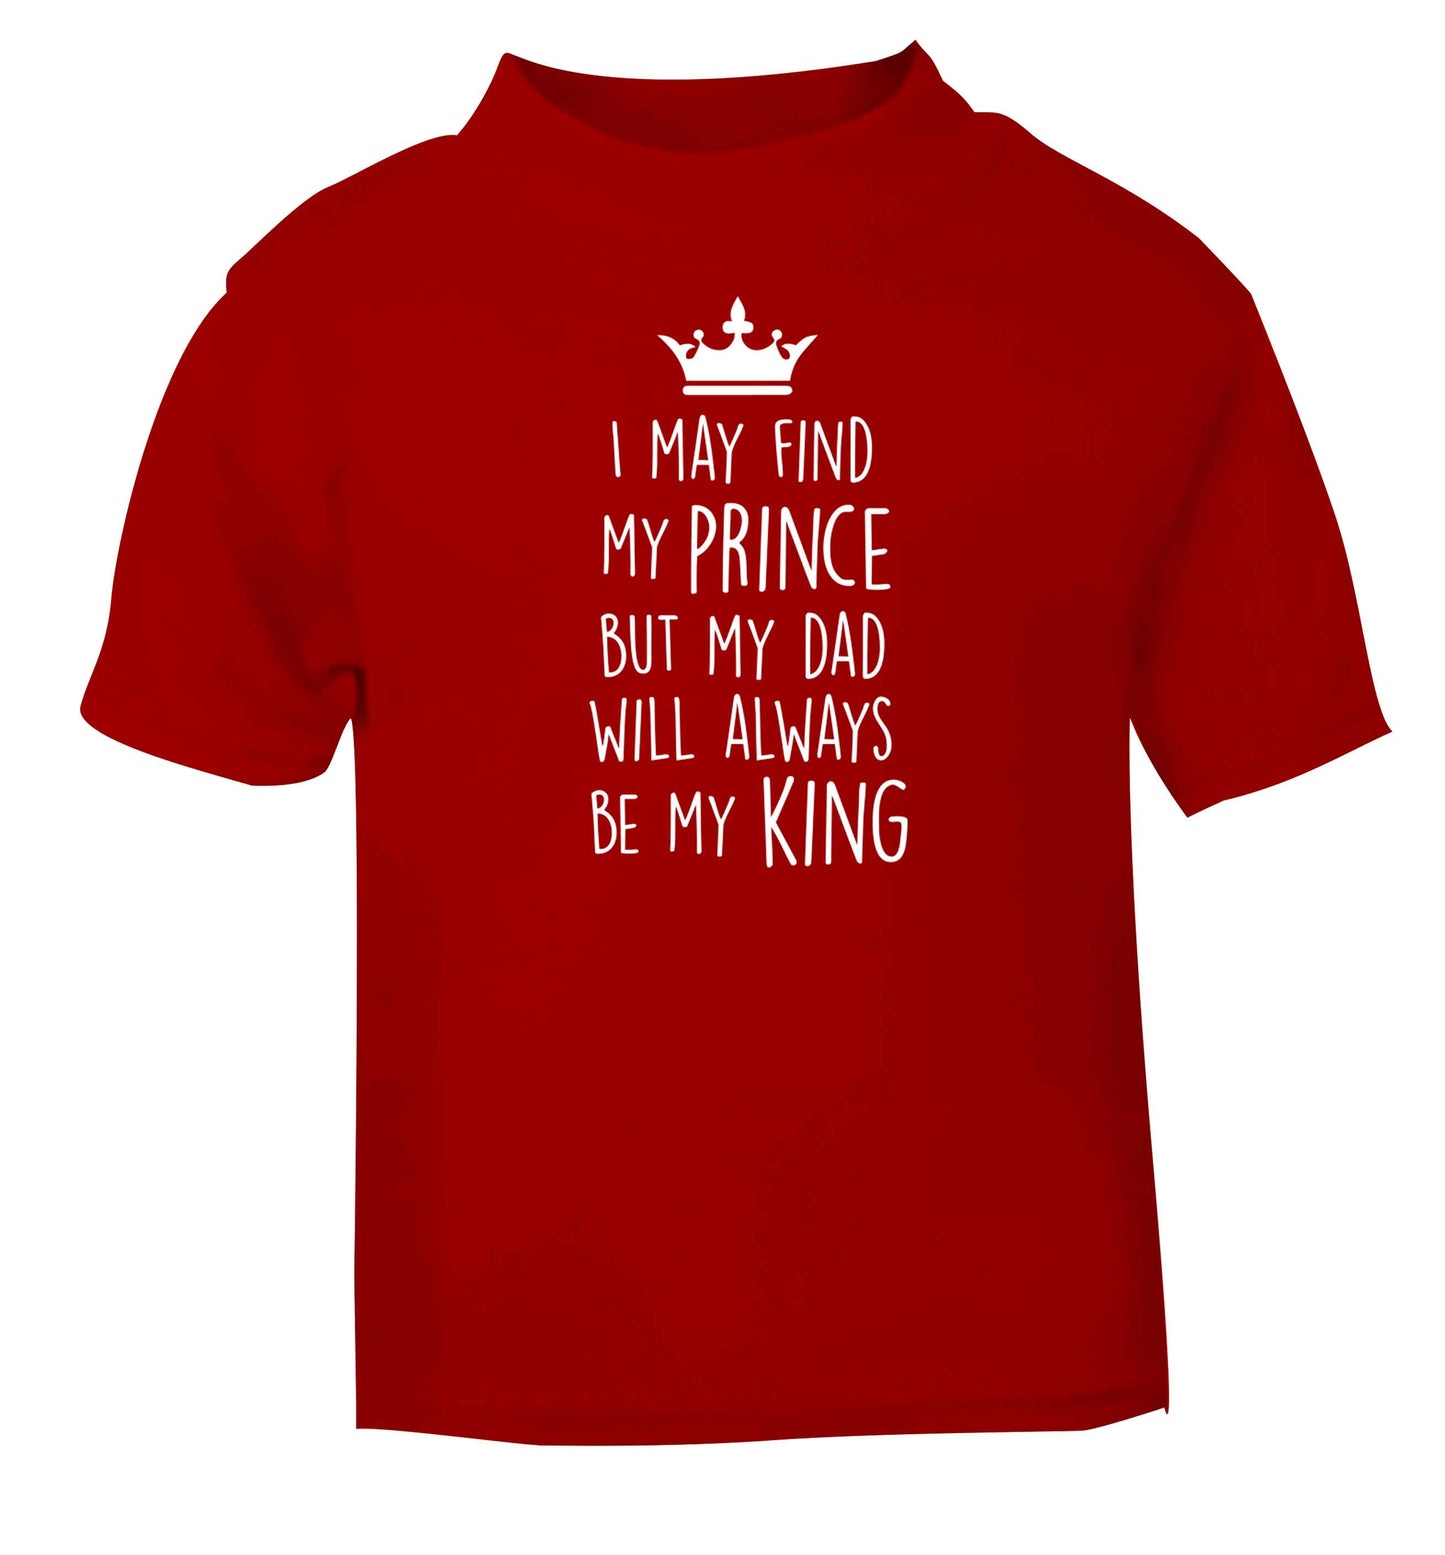 I may find my prince but my dad will always be my king red baby toddler Tshirt 2 Years